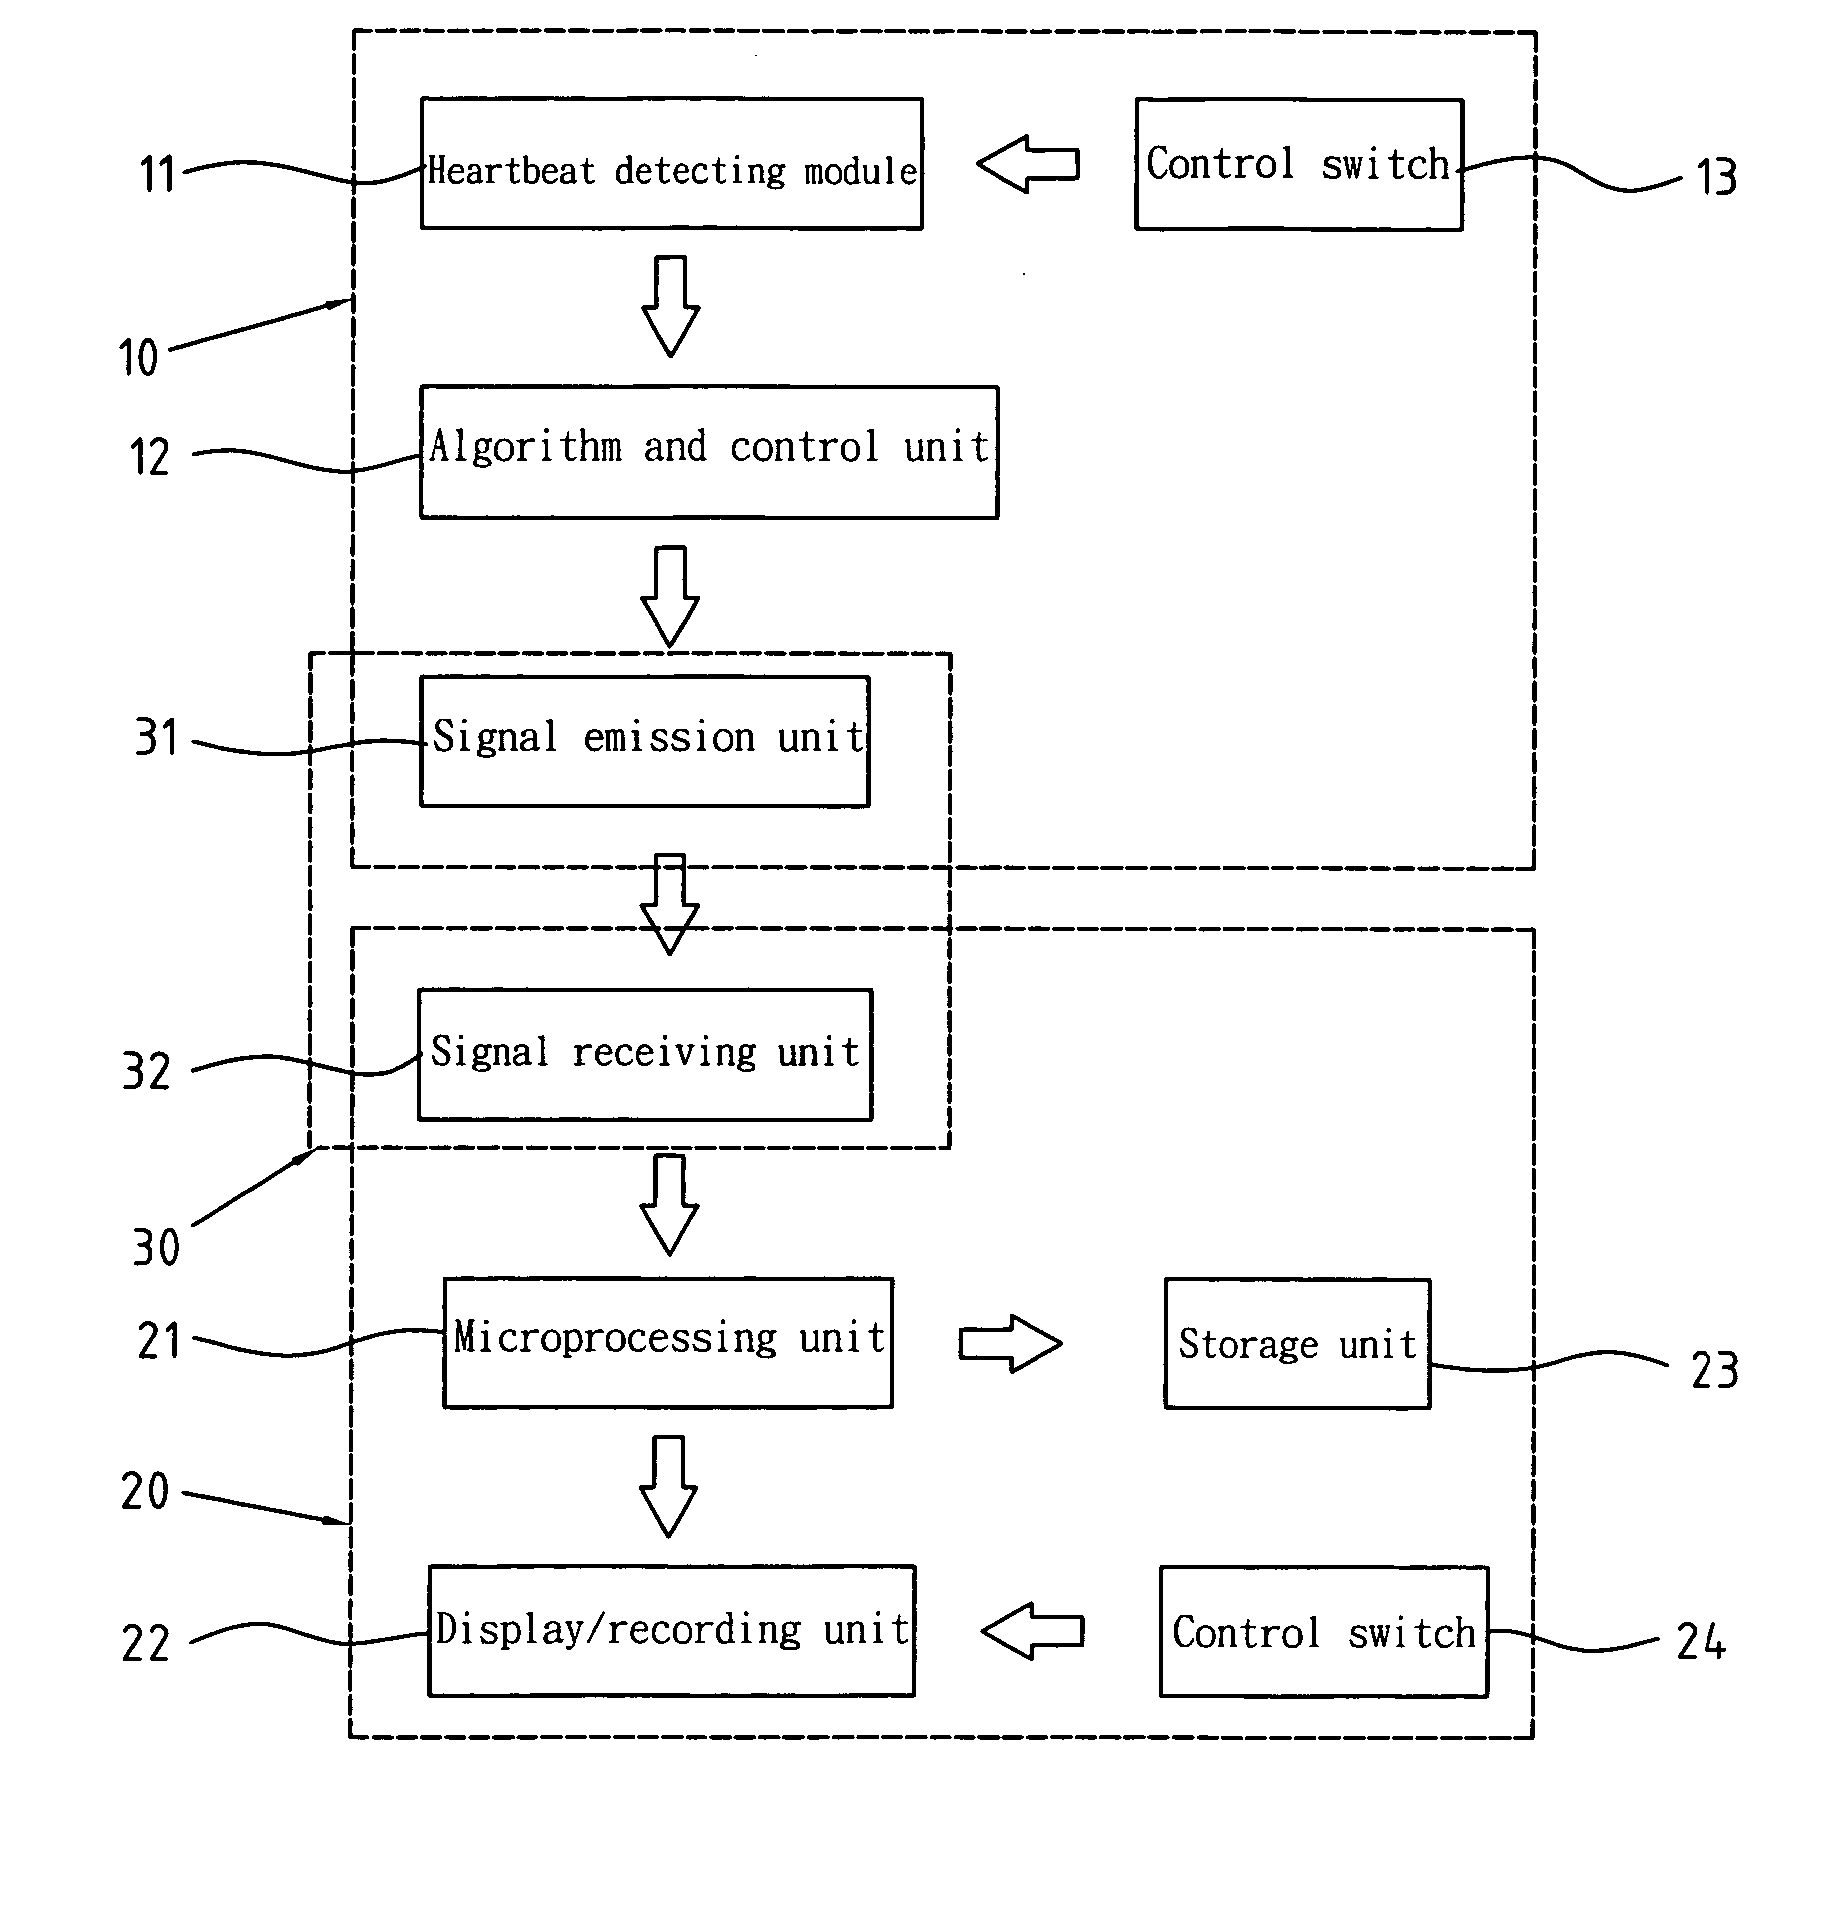 System using a bluetooth headphone for heartbeat monitoring, electronic recording, and displaying data